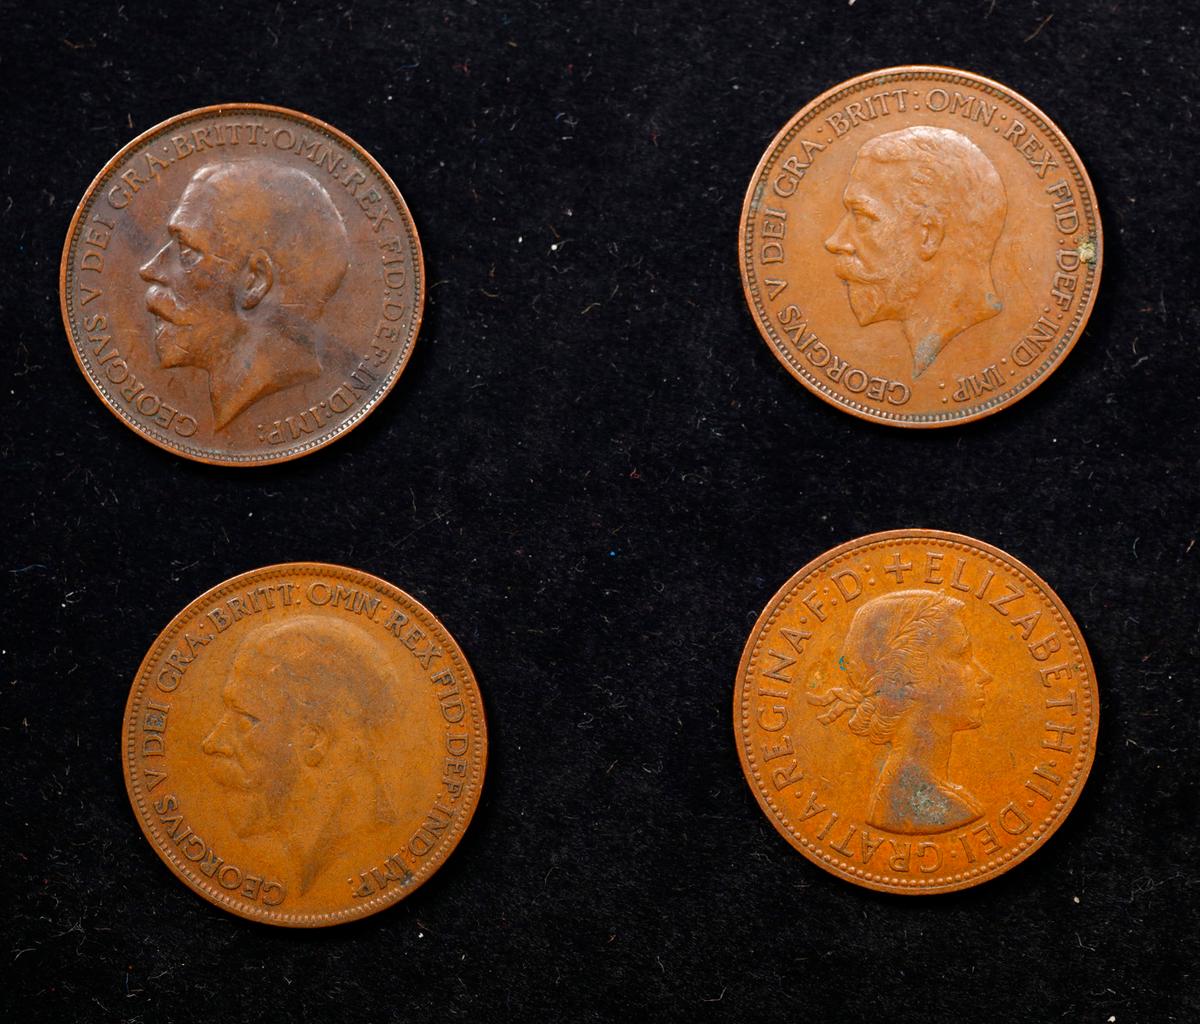 Group of 4 Coins, Great Britain Pennies, 1912, 1927, 1936, 1961 .